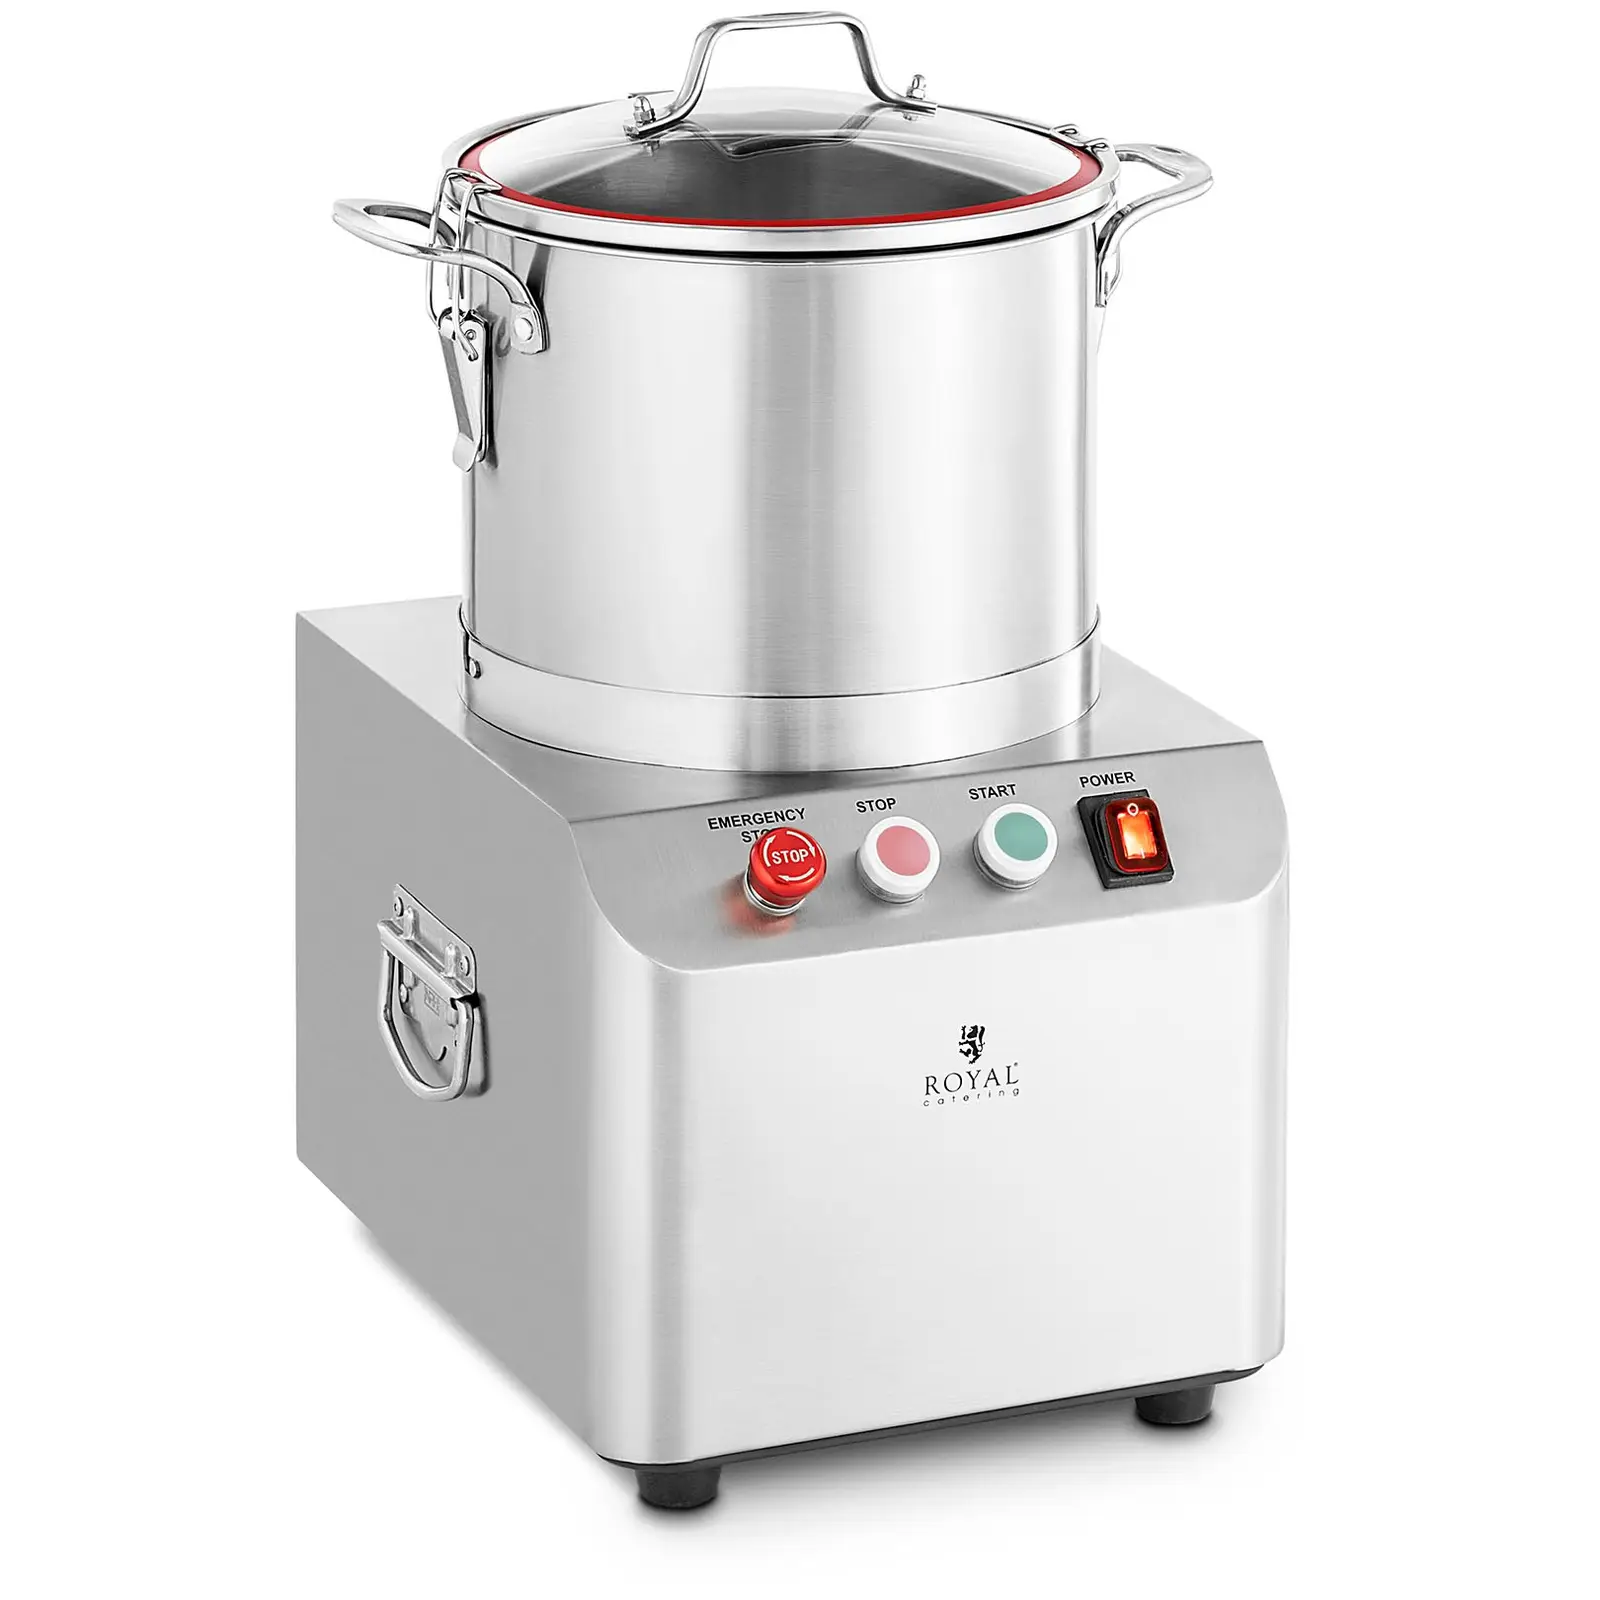 Bowl Cutter - 1400 rpm - Royal Catering - 10 L